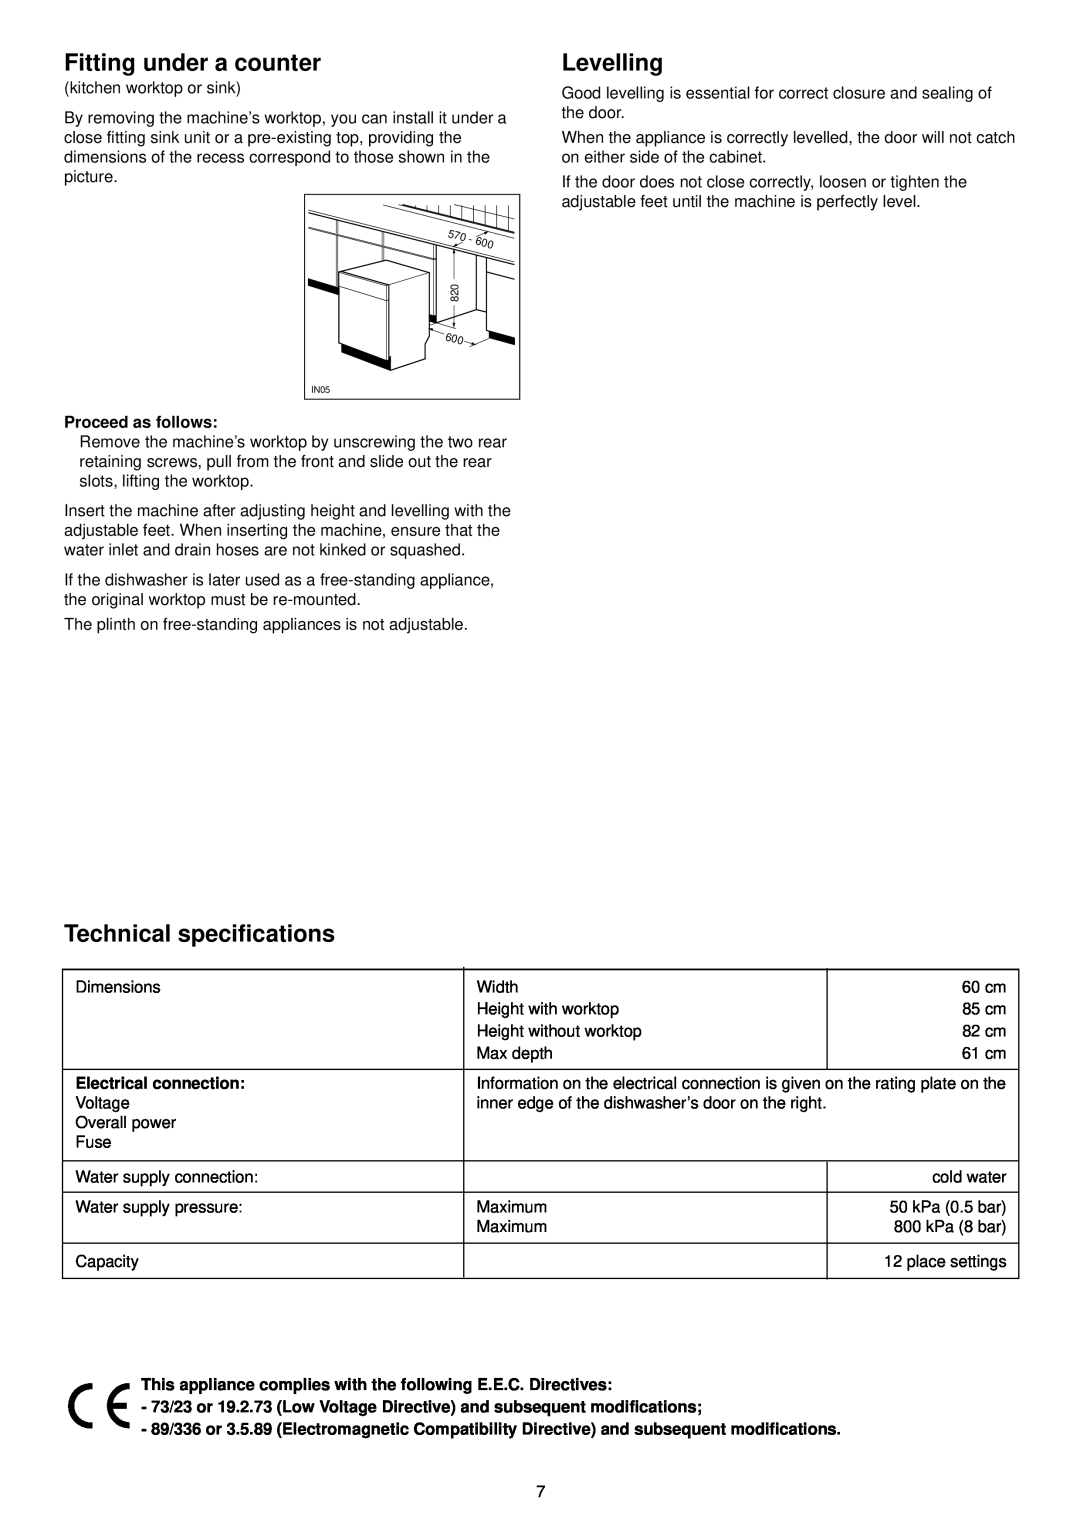 Tricity Bendix DH 103 manual Fitting under a counter, Levelling, Technical specifications, Proceed as follows 